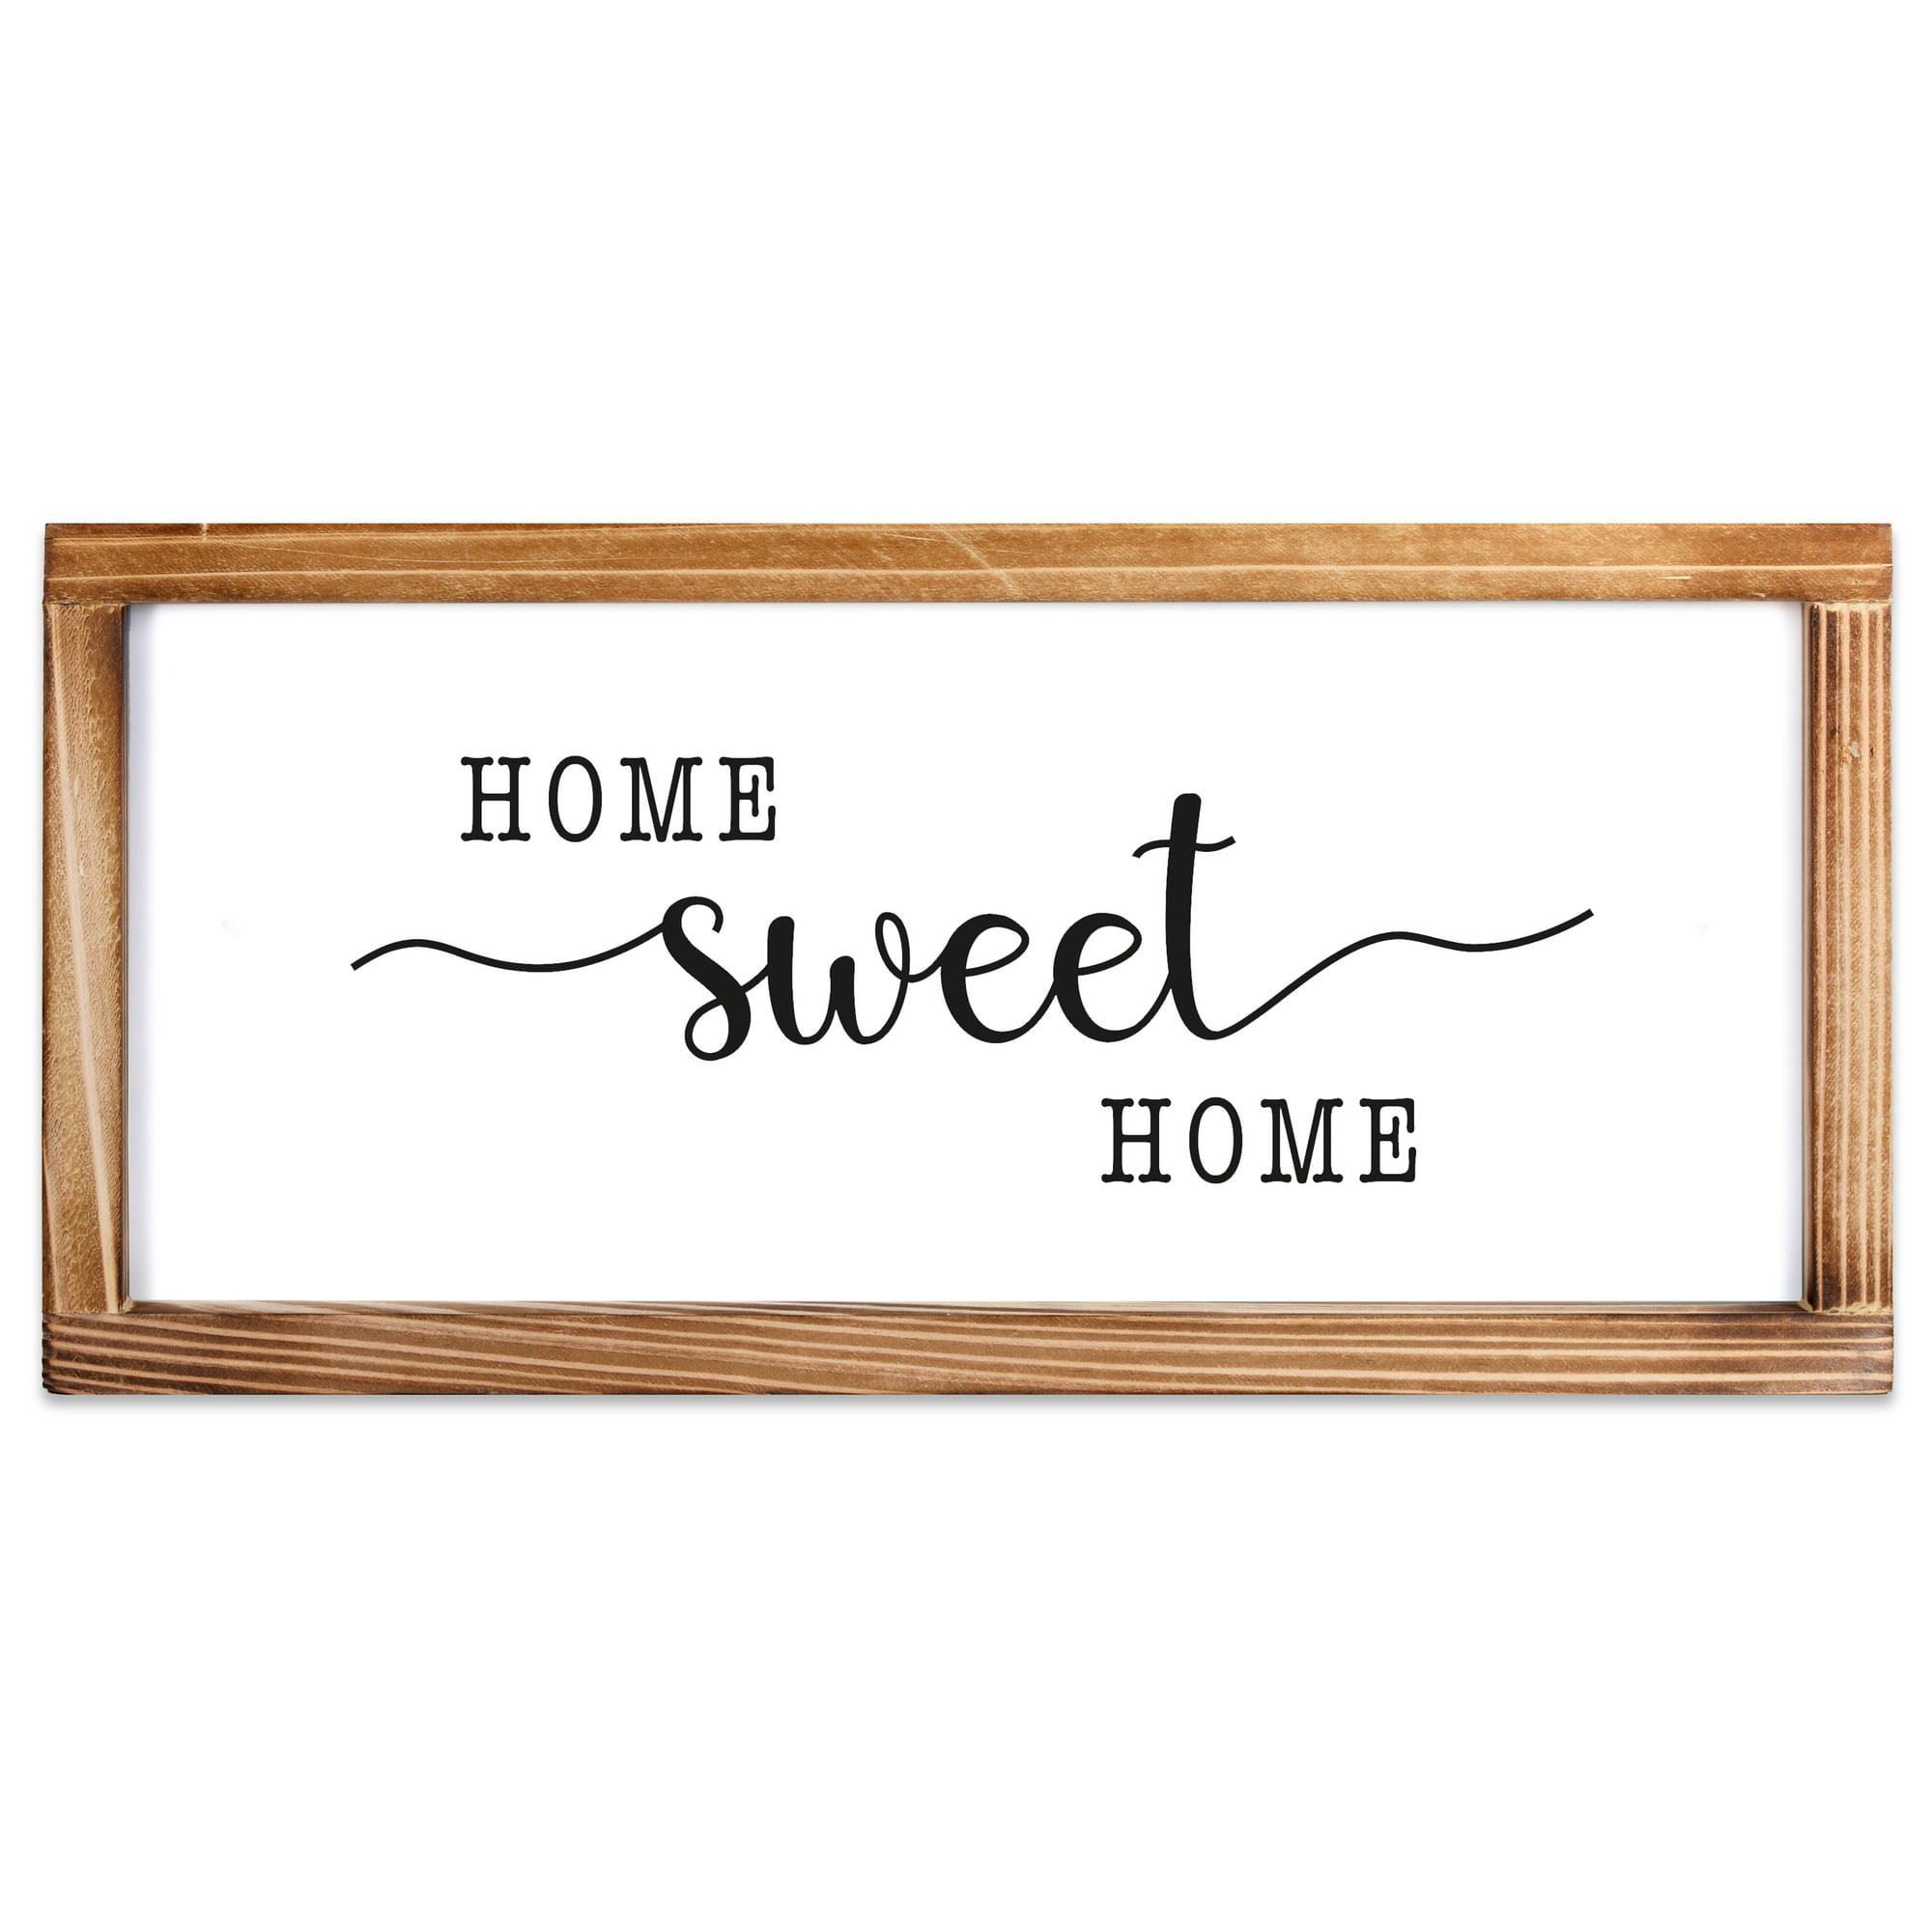 Home Sweet Home Sign - Rustic Farmhouse Decor for the Home Sign ...